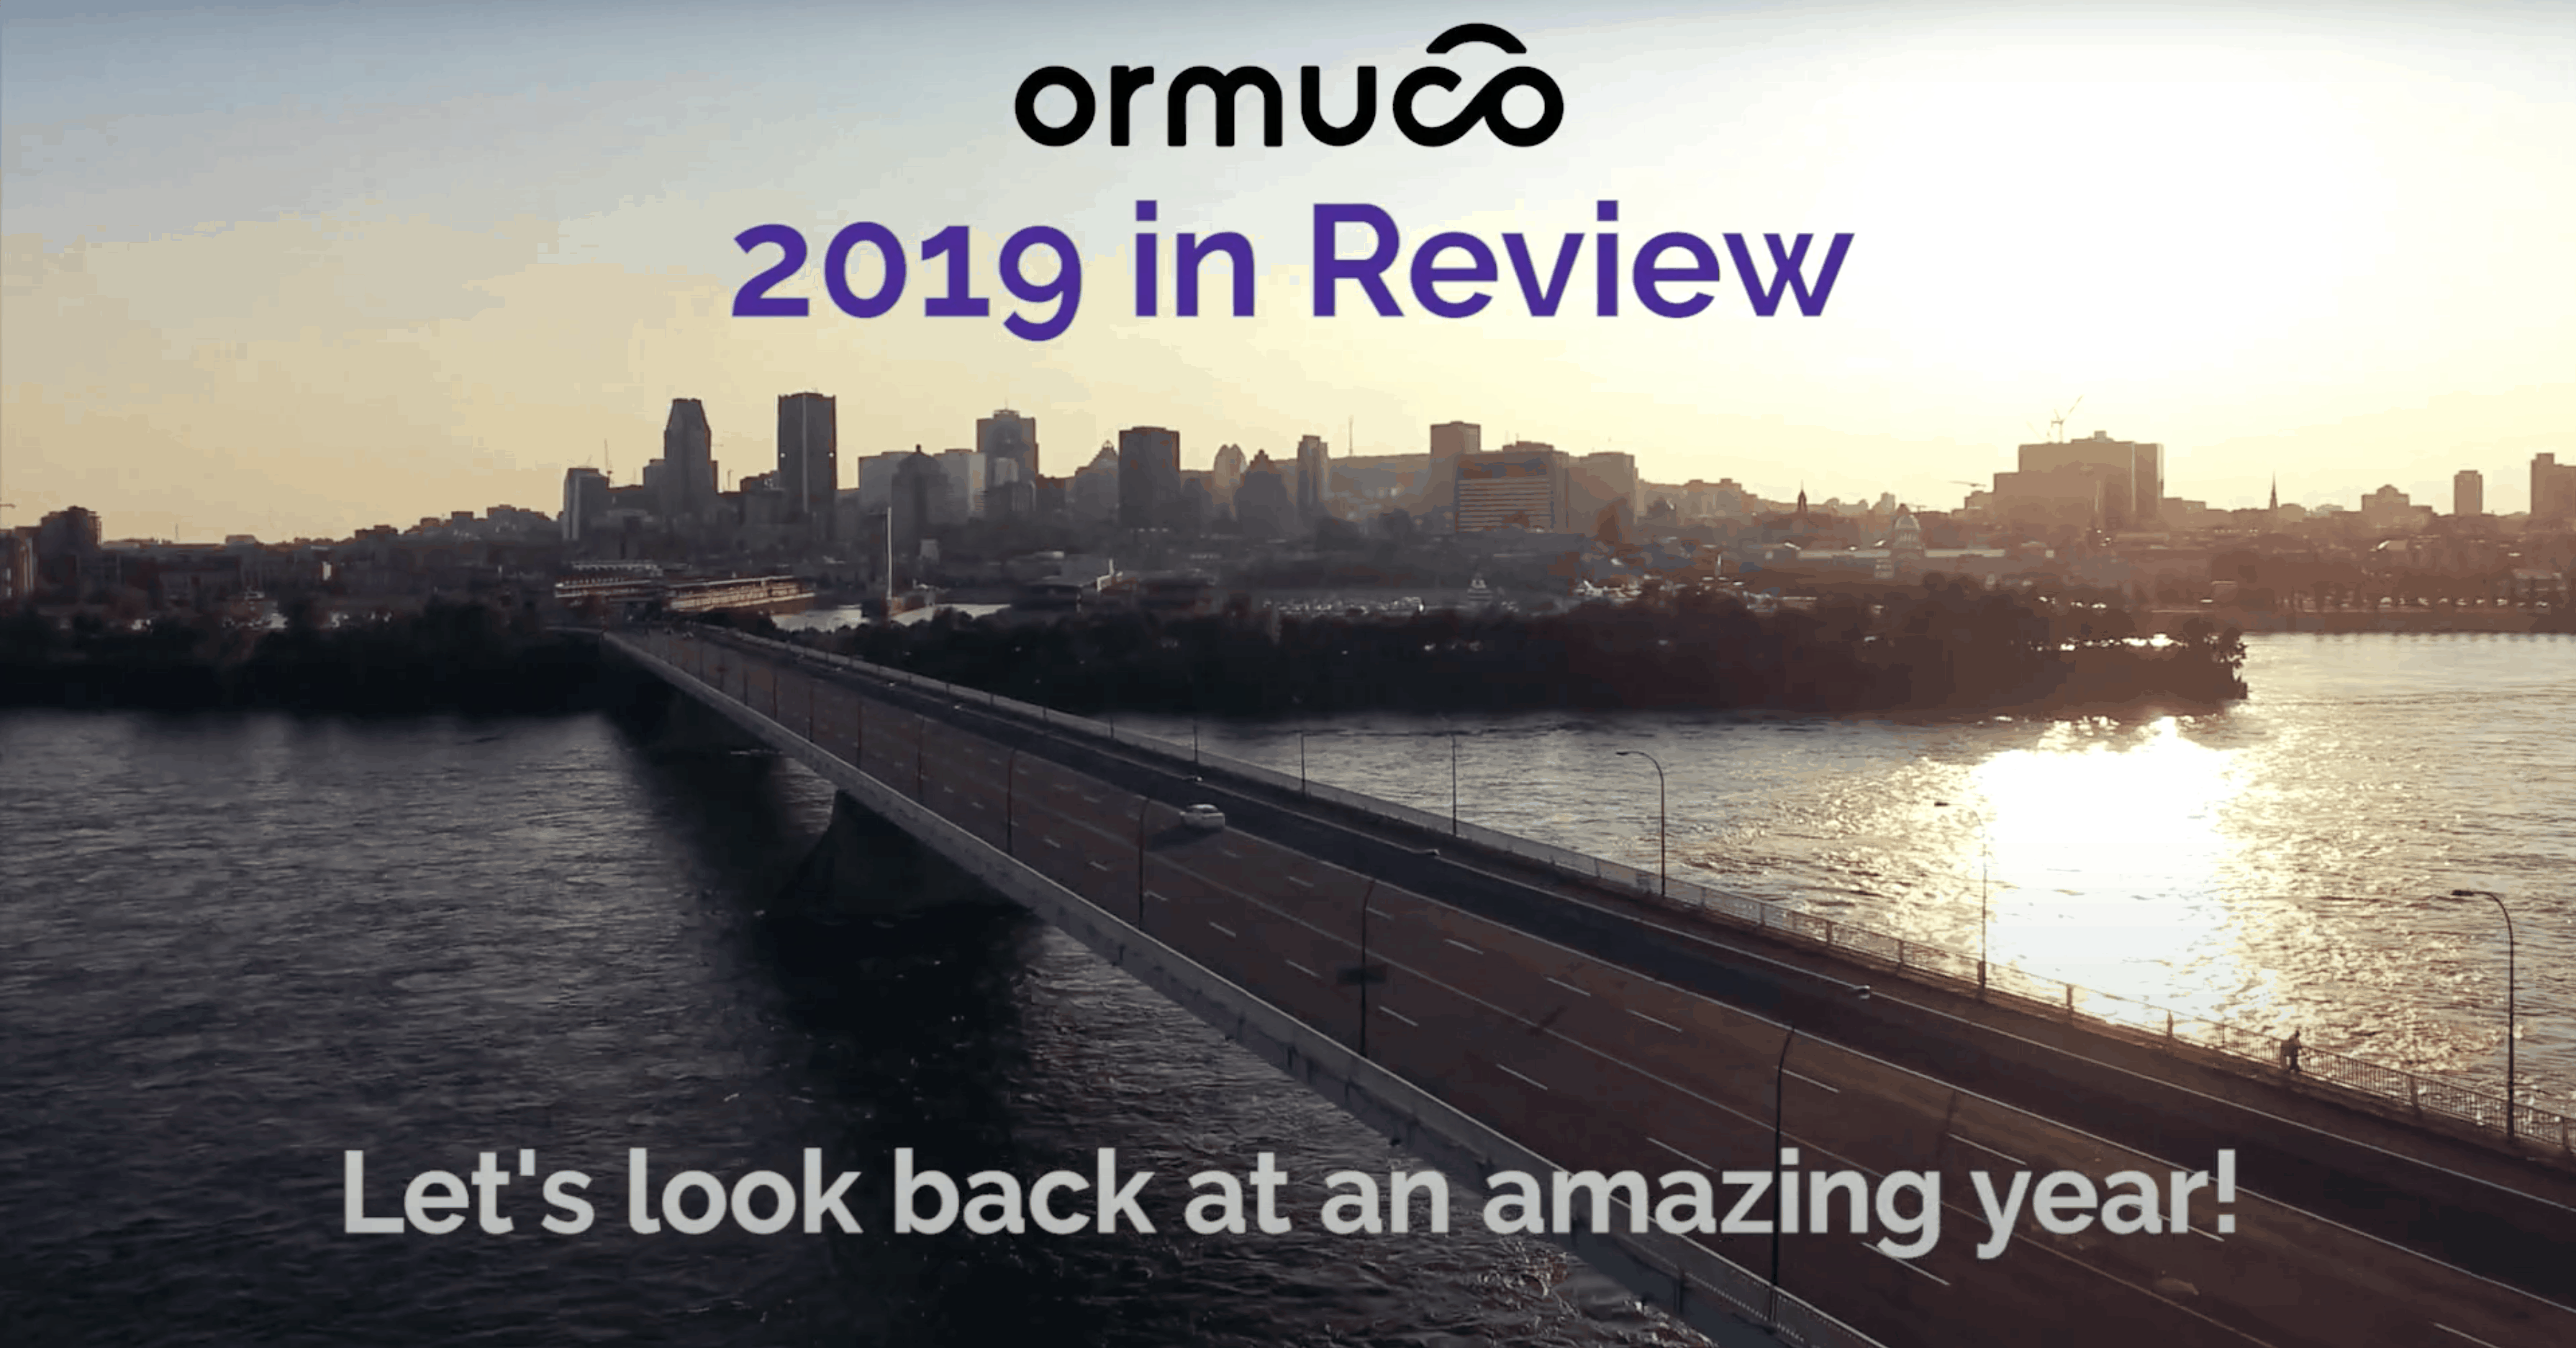 2019 in Review: Thank You for a Great Year!